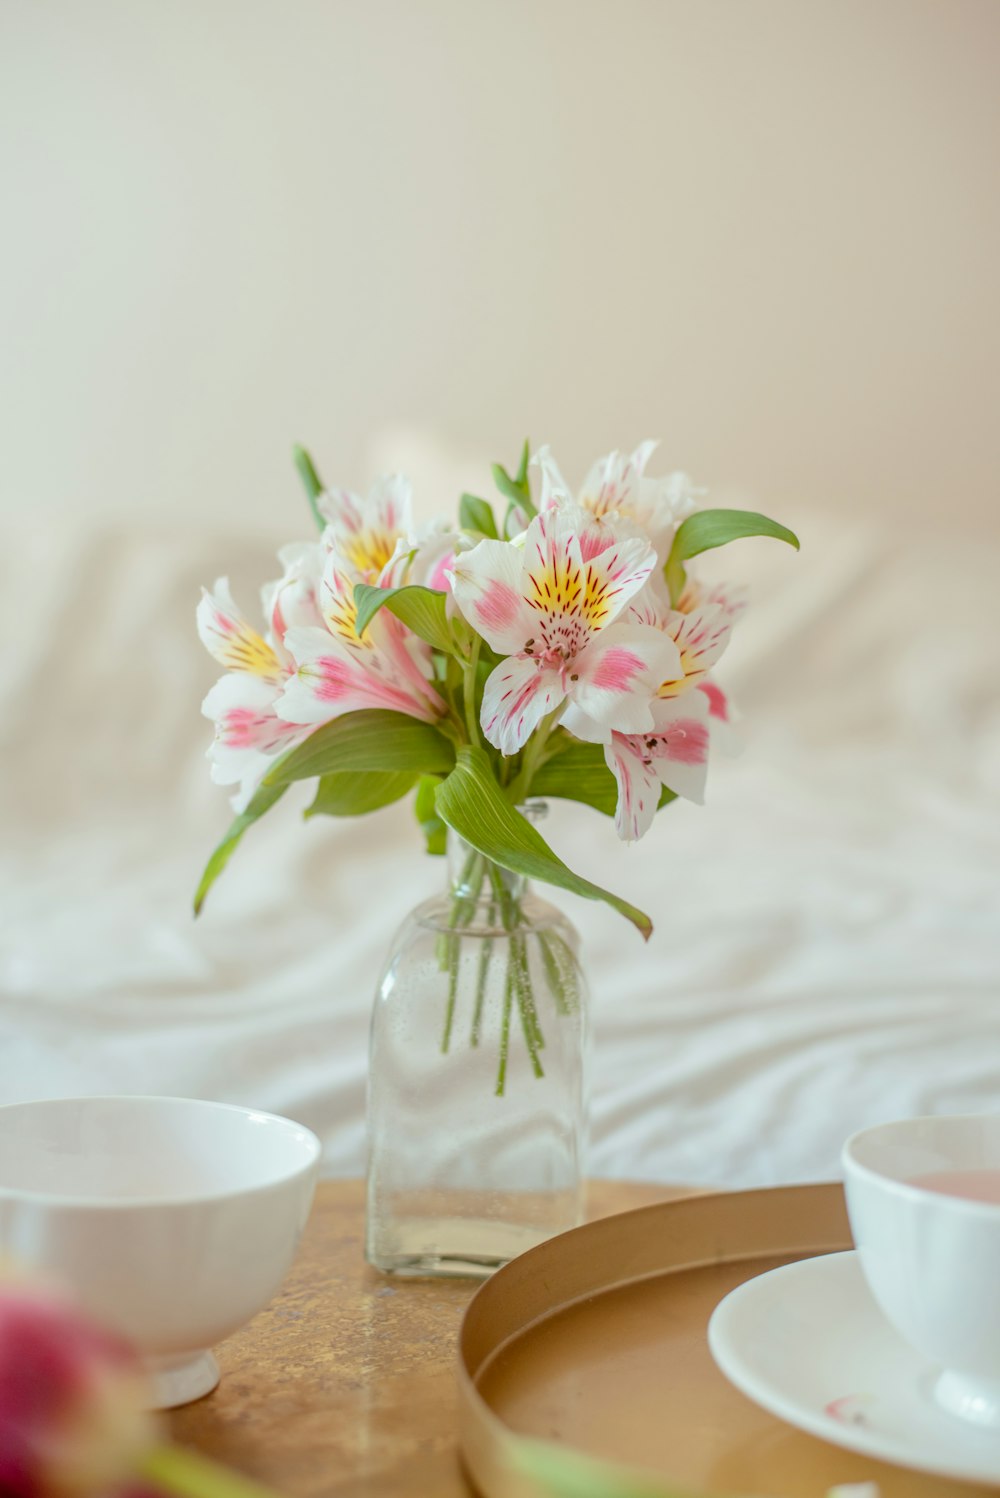 a glass vase with pink and white flowers in it